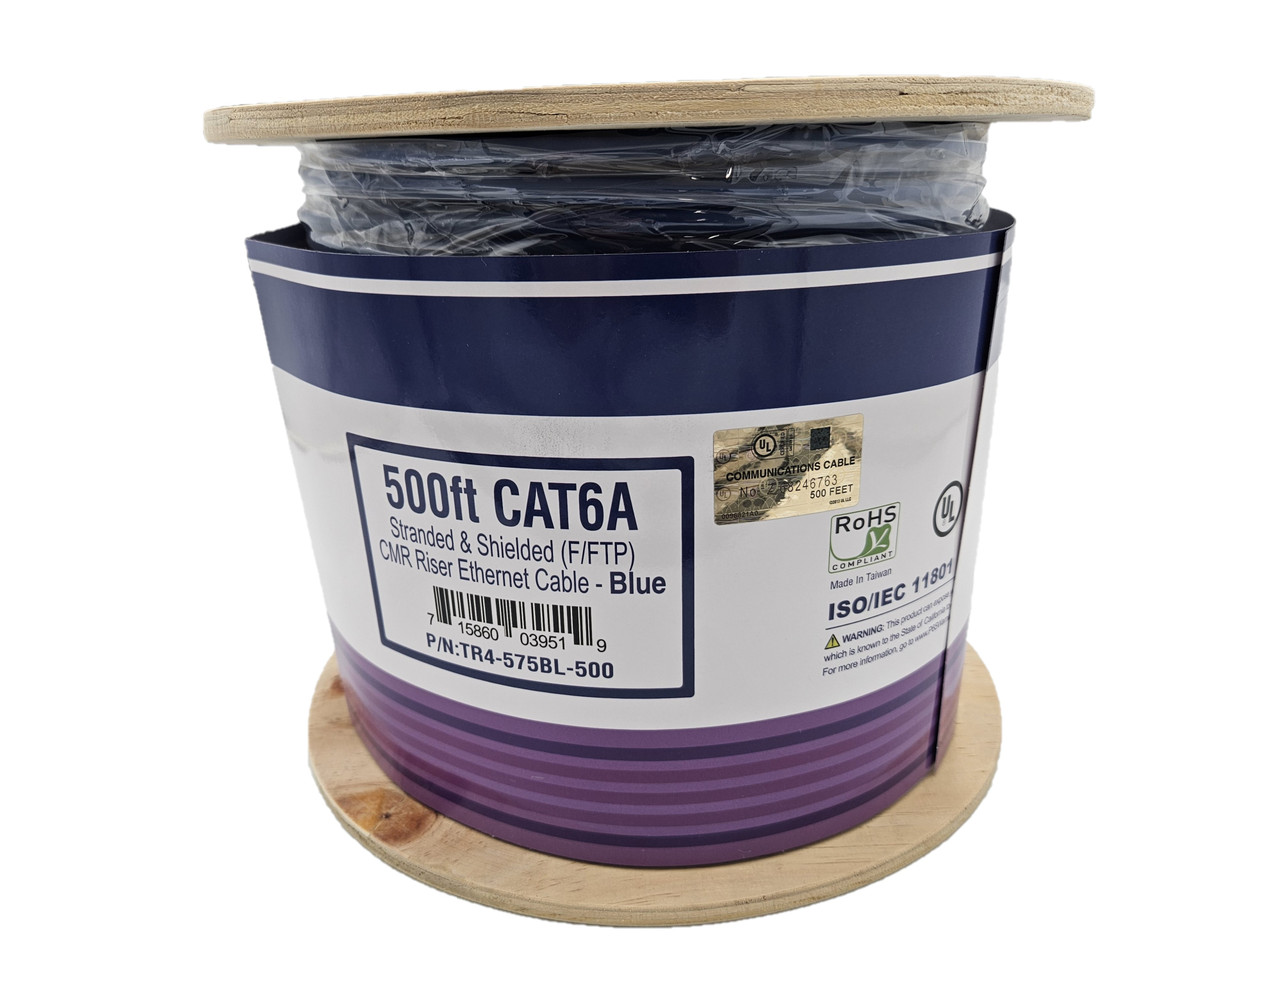 500 Feet Cat 6A Stranded & Shielded (F/FTP) CMR Riser Ethernet (26AWG) Cable-Blue